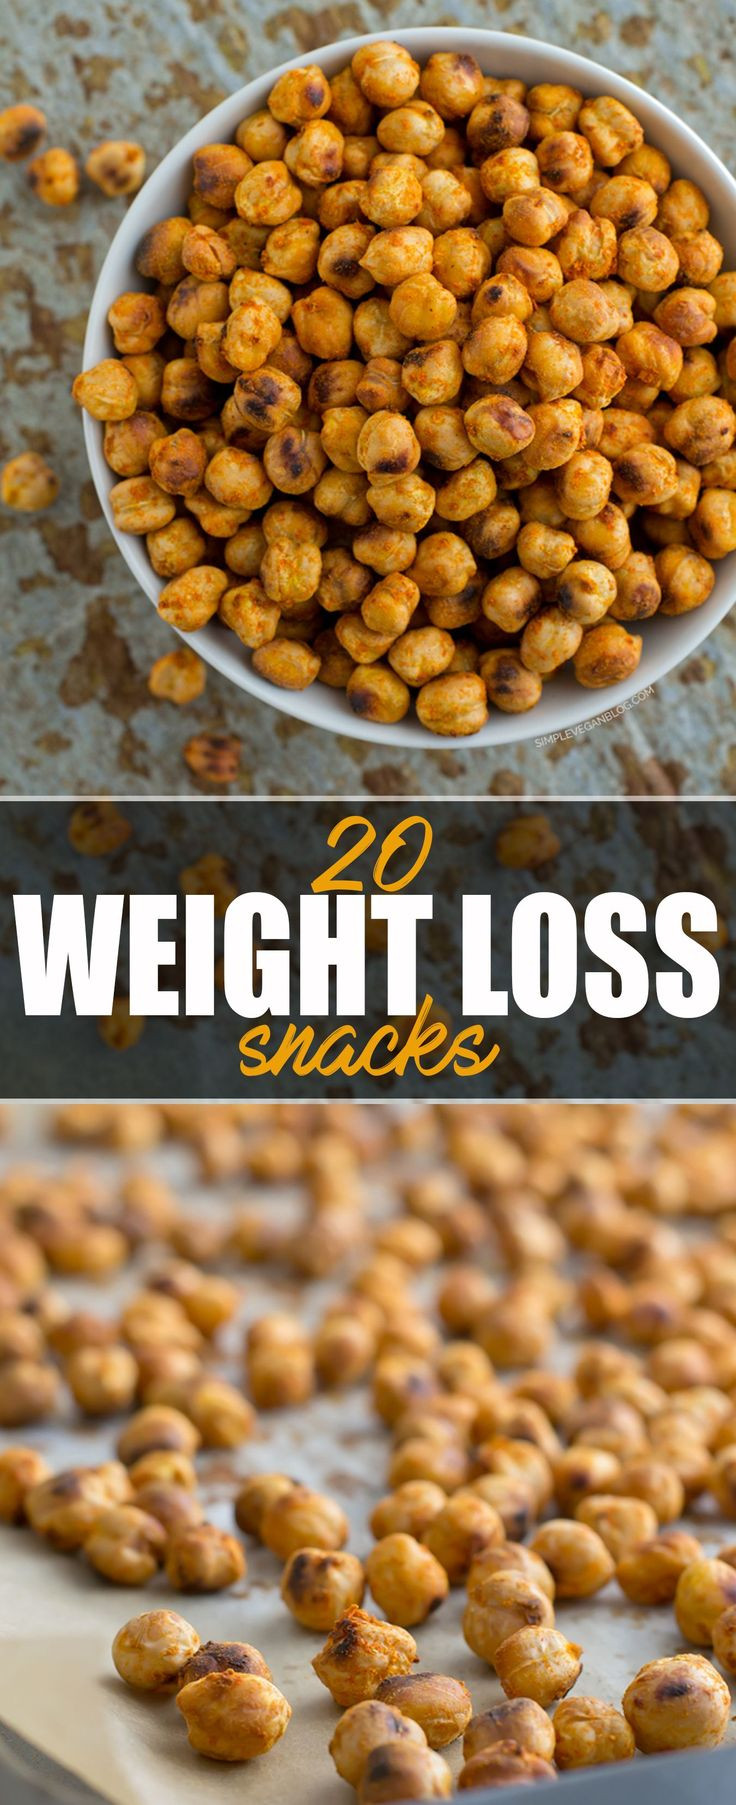 Healthy Weight Loss Snacks
 20 Easy Healthy Snack Ideas The Best Snacks For Weight